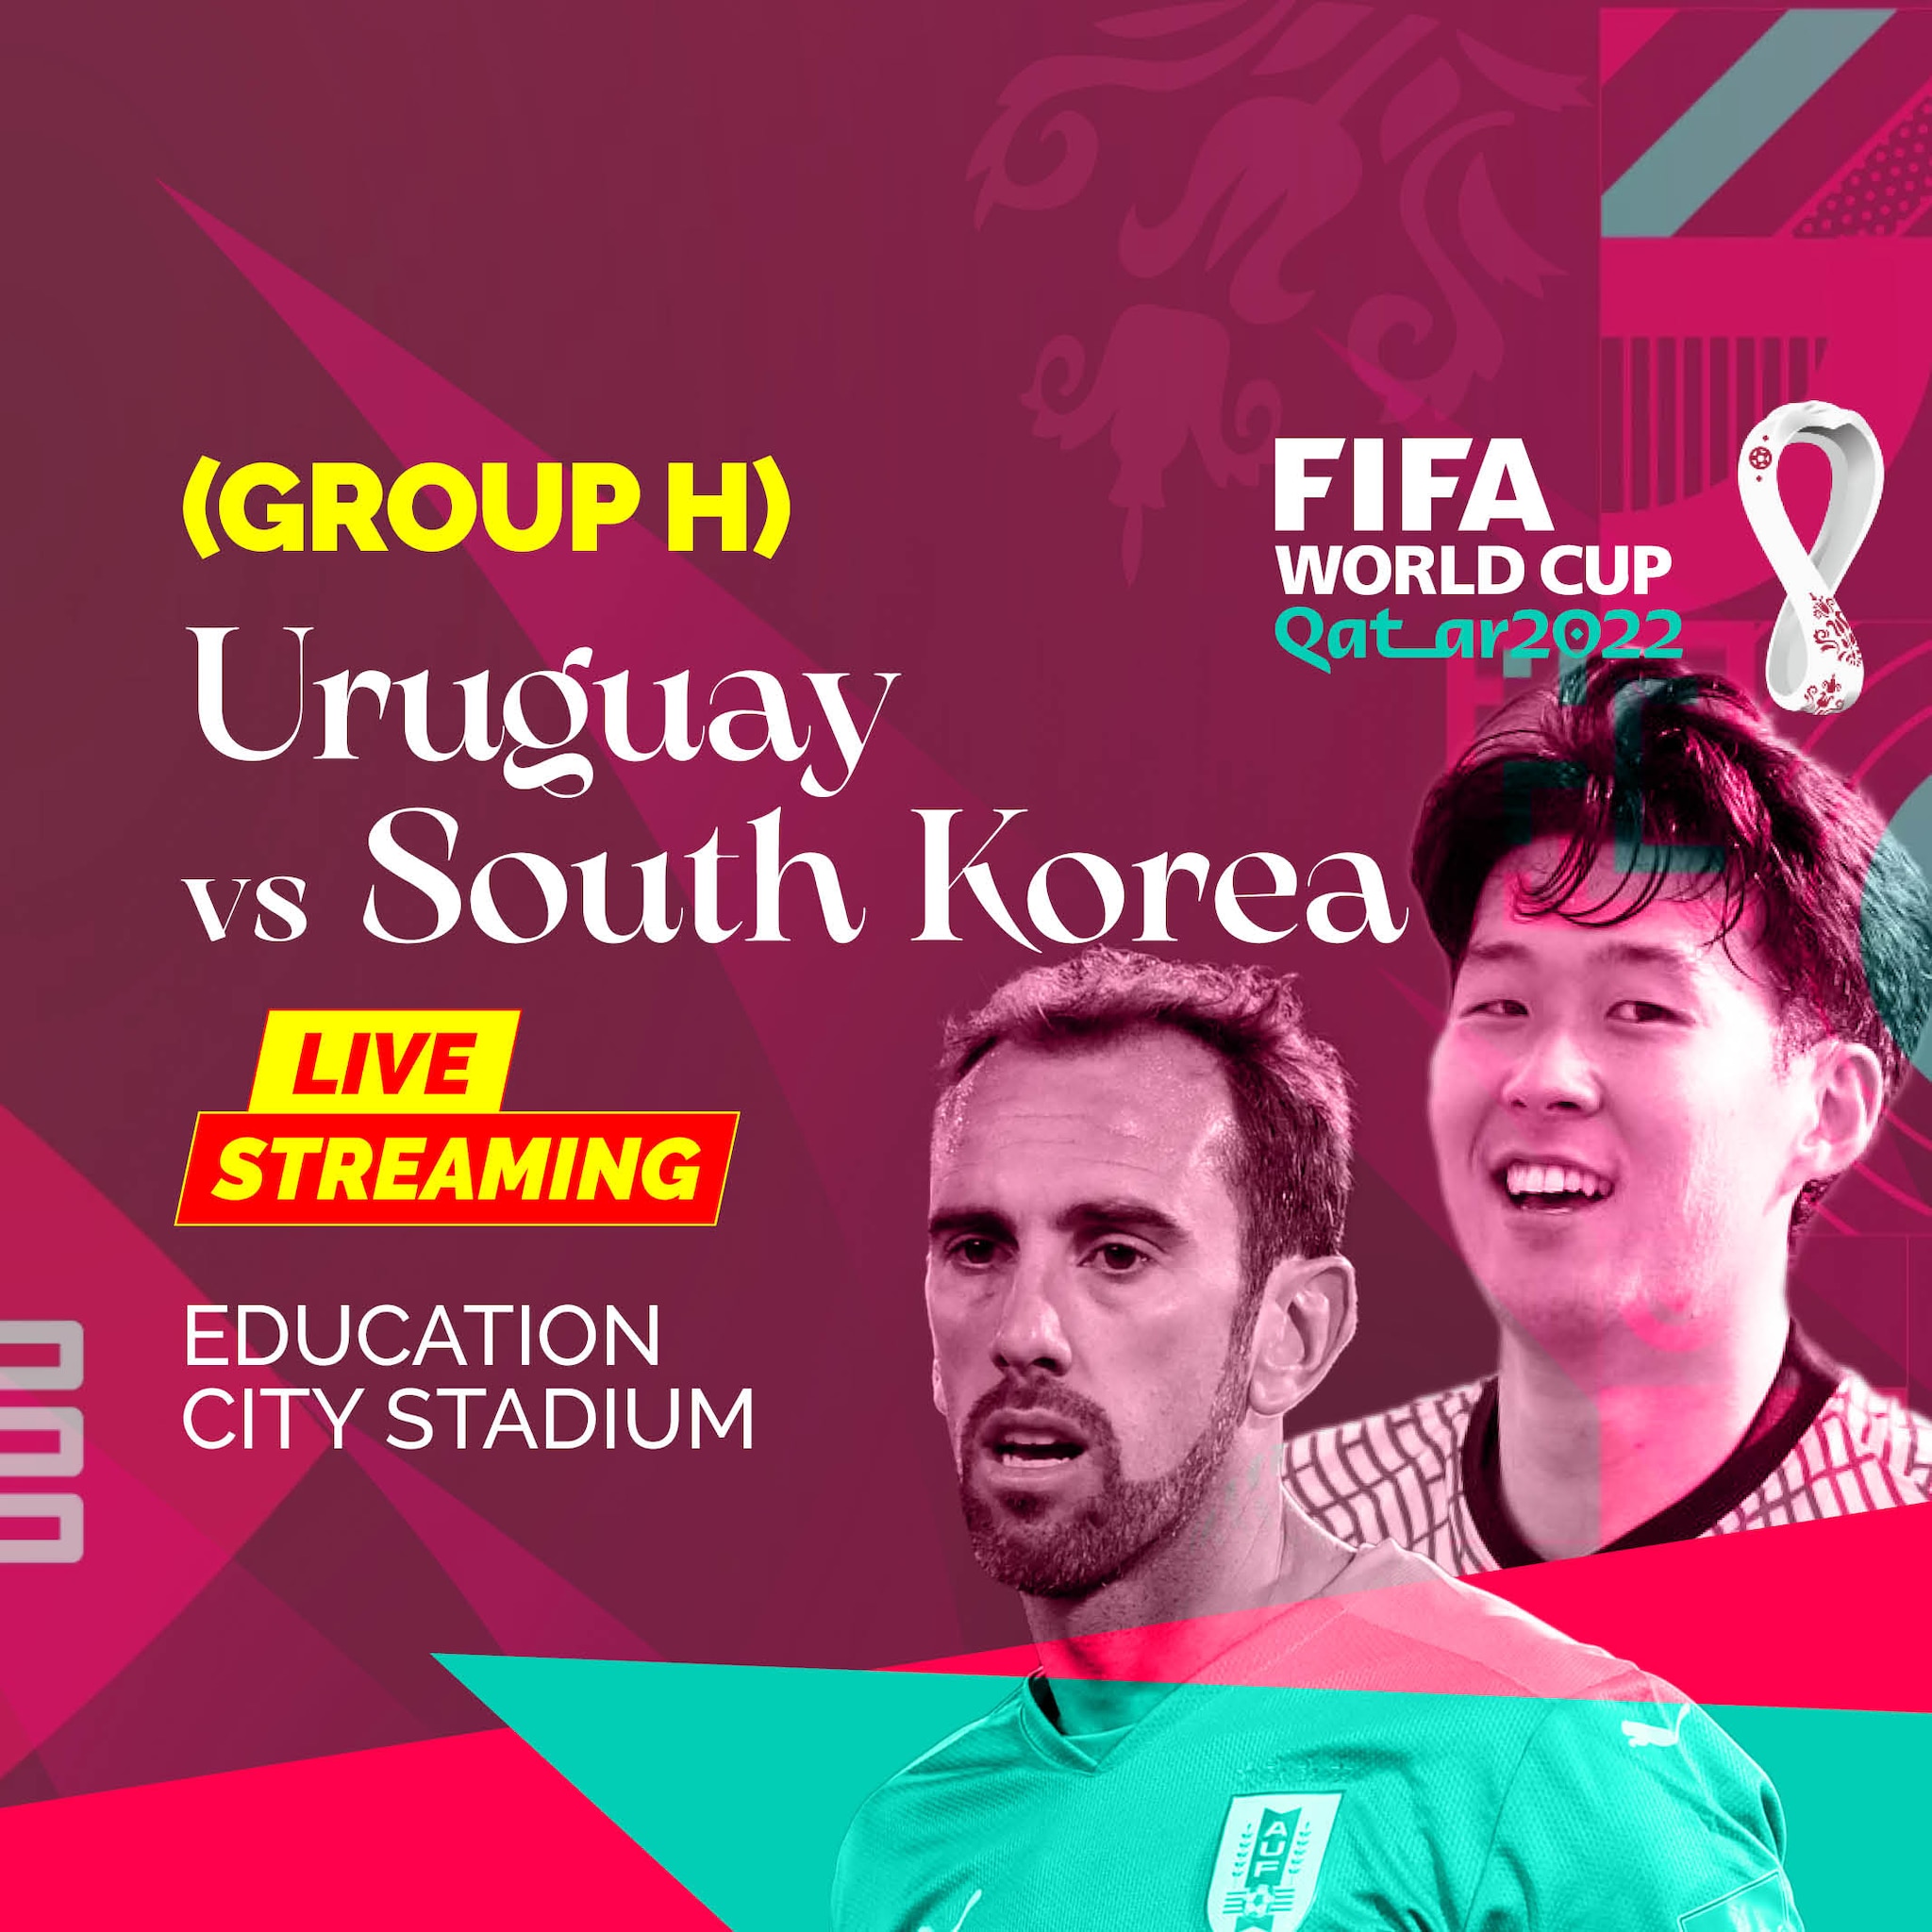 Uruguay vs Korea Live Streaming How to Watch FIFA World Cup 2022 Match Coverage on TV And Online